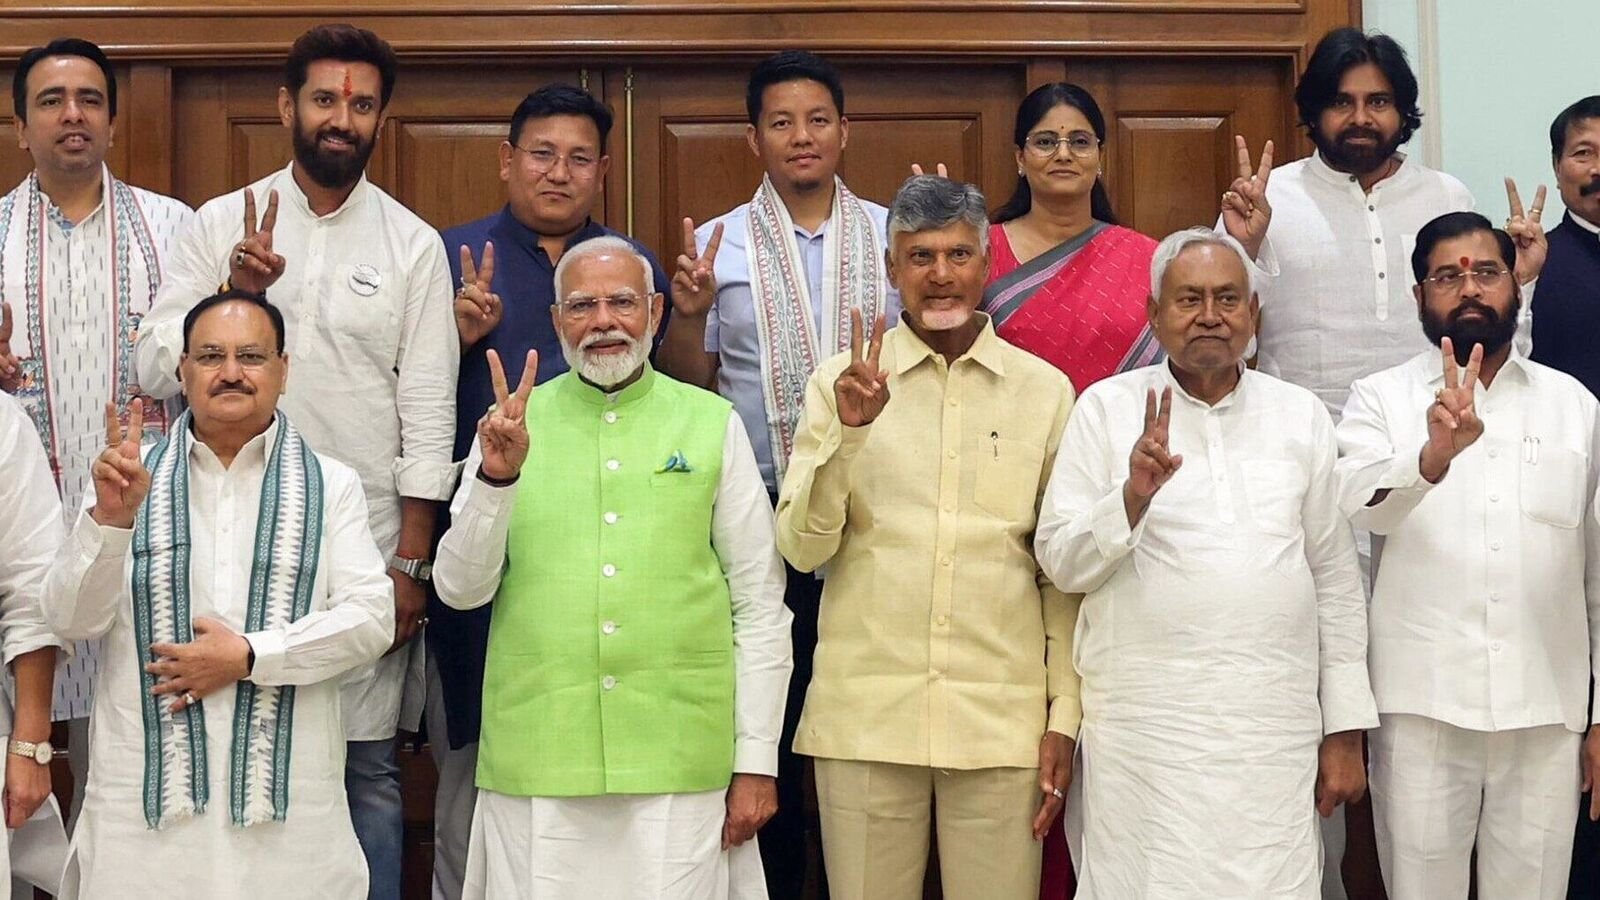 Modi 3.0 Cabinet: A look at the likely candidates for ministerial berths today